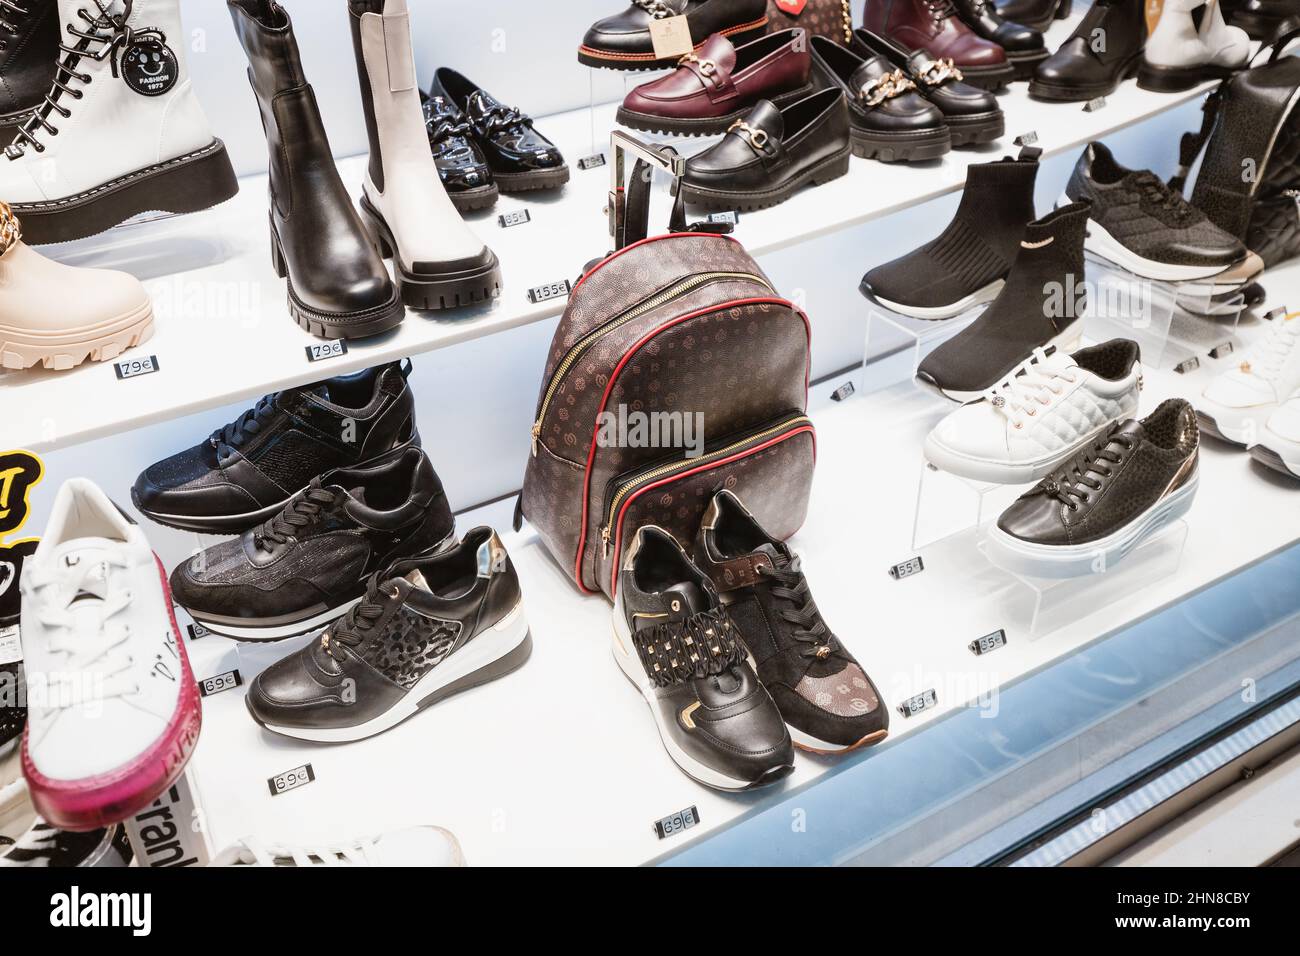 Aldo shoe store front hi-res stock photography and images - Alamy